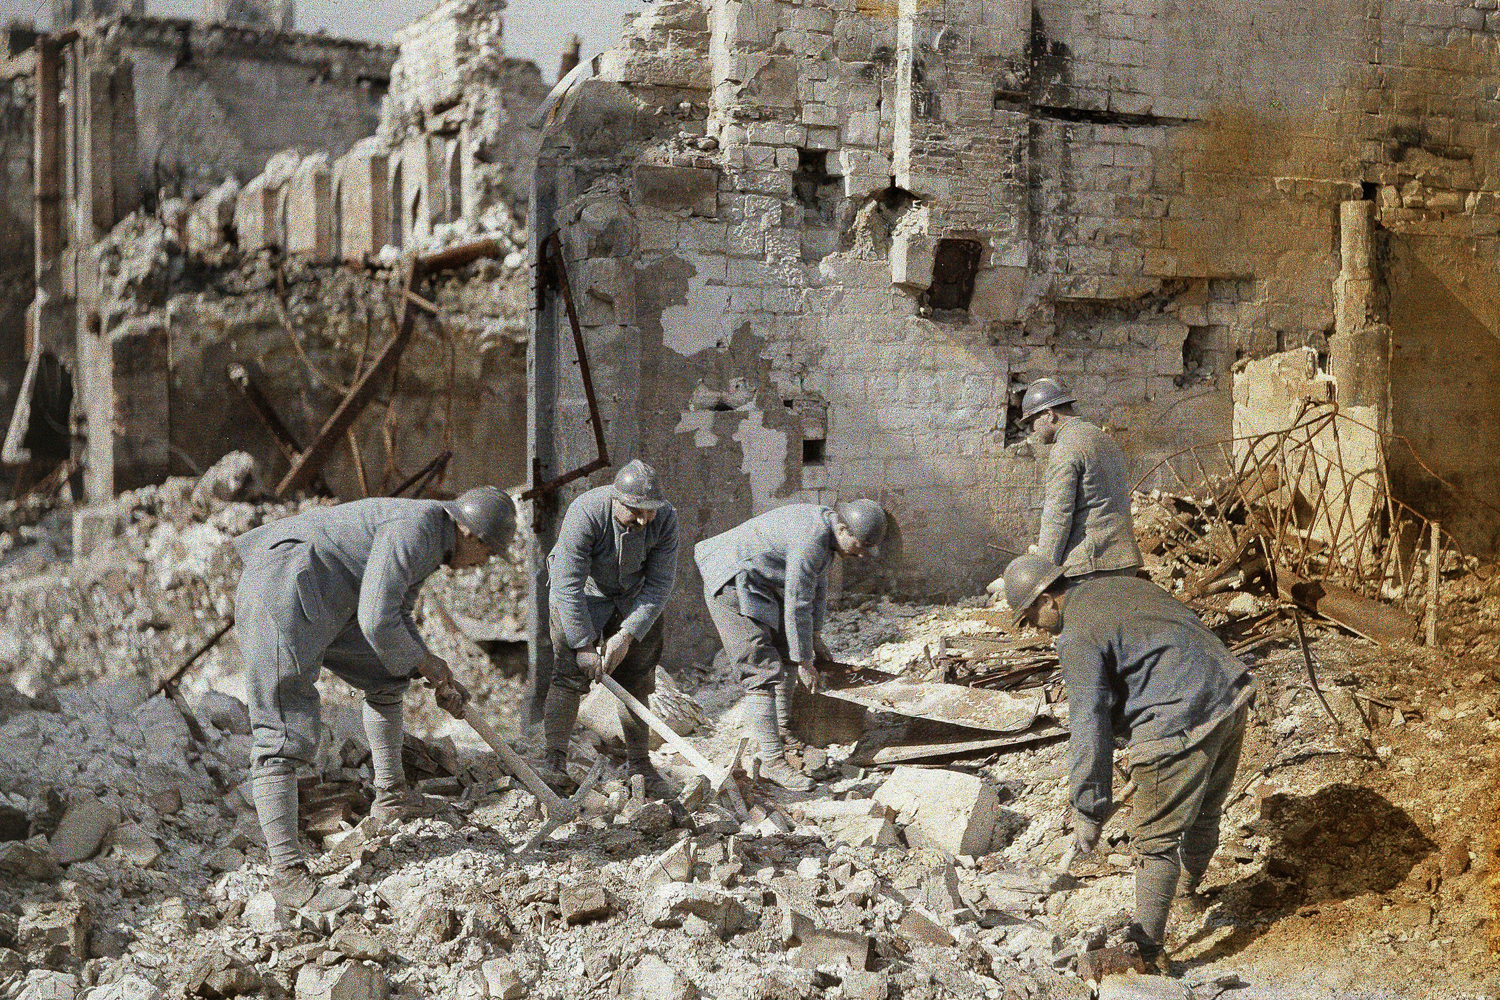 Five French soldiers clear rubble in the ruins of Reims, France, which was destroyed by German artillery and air raids, 1917.